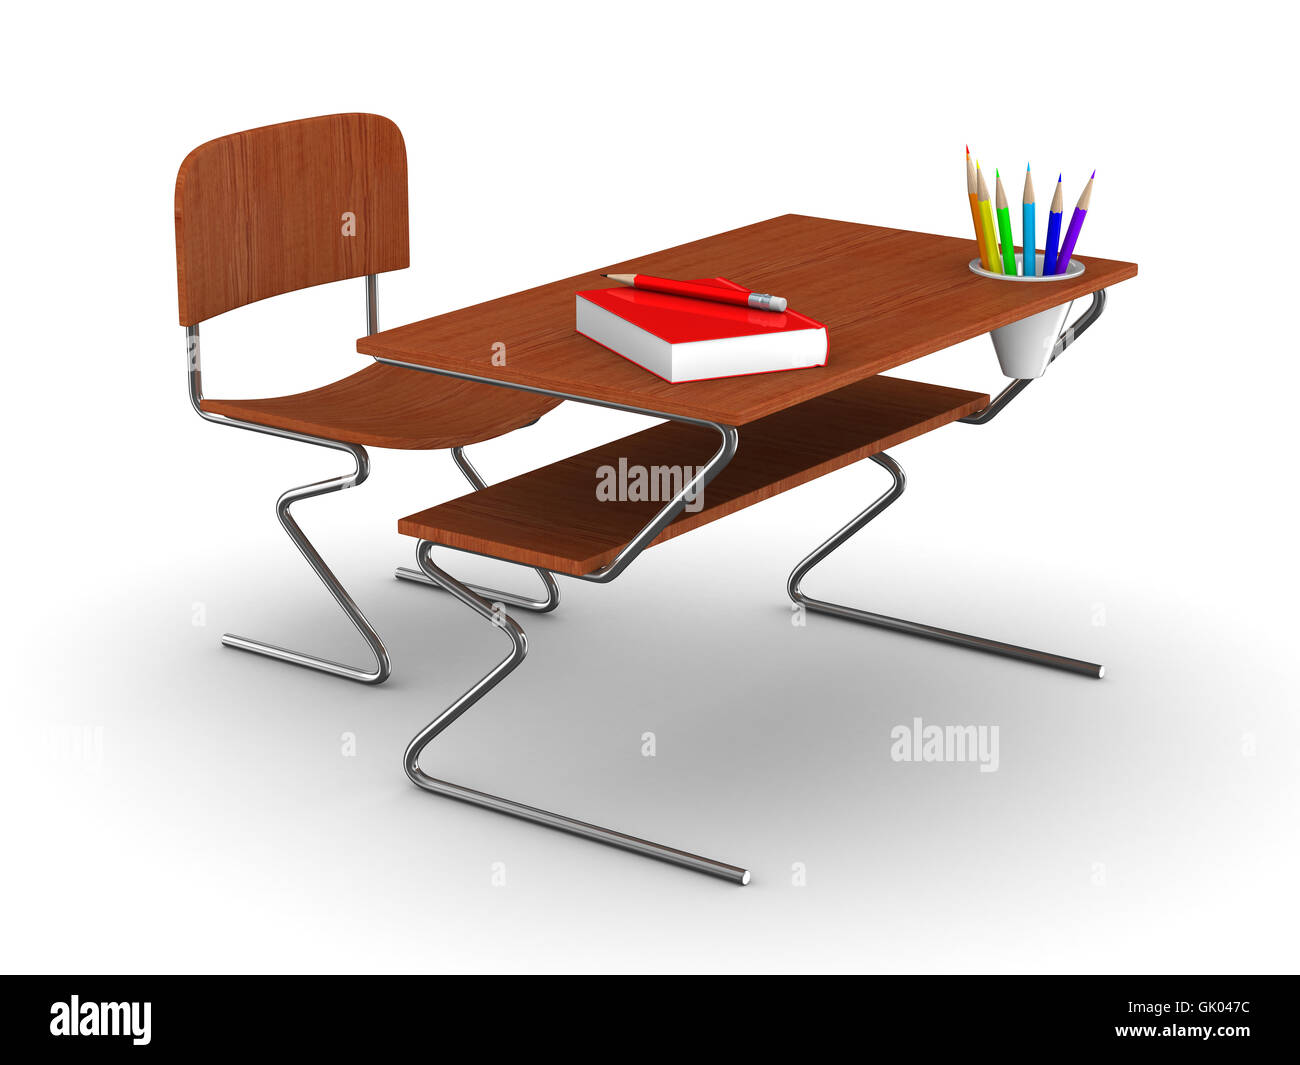 School desk and chair. Isolated 3D image Stock Photo